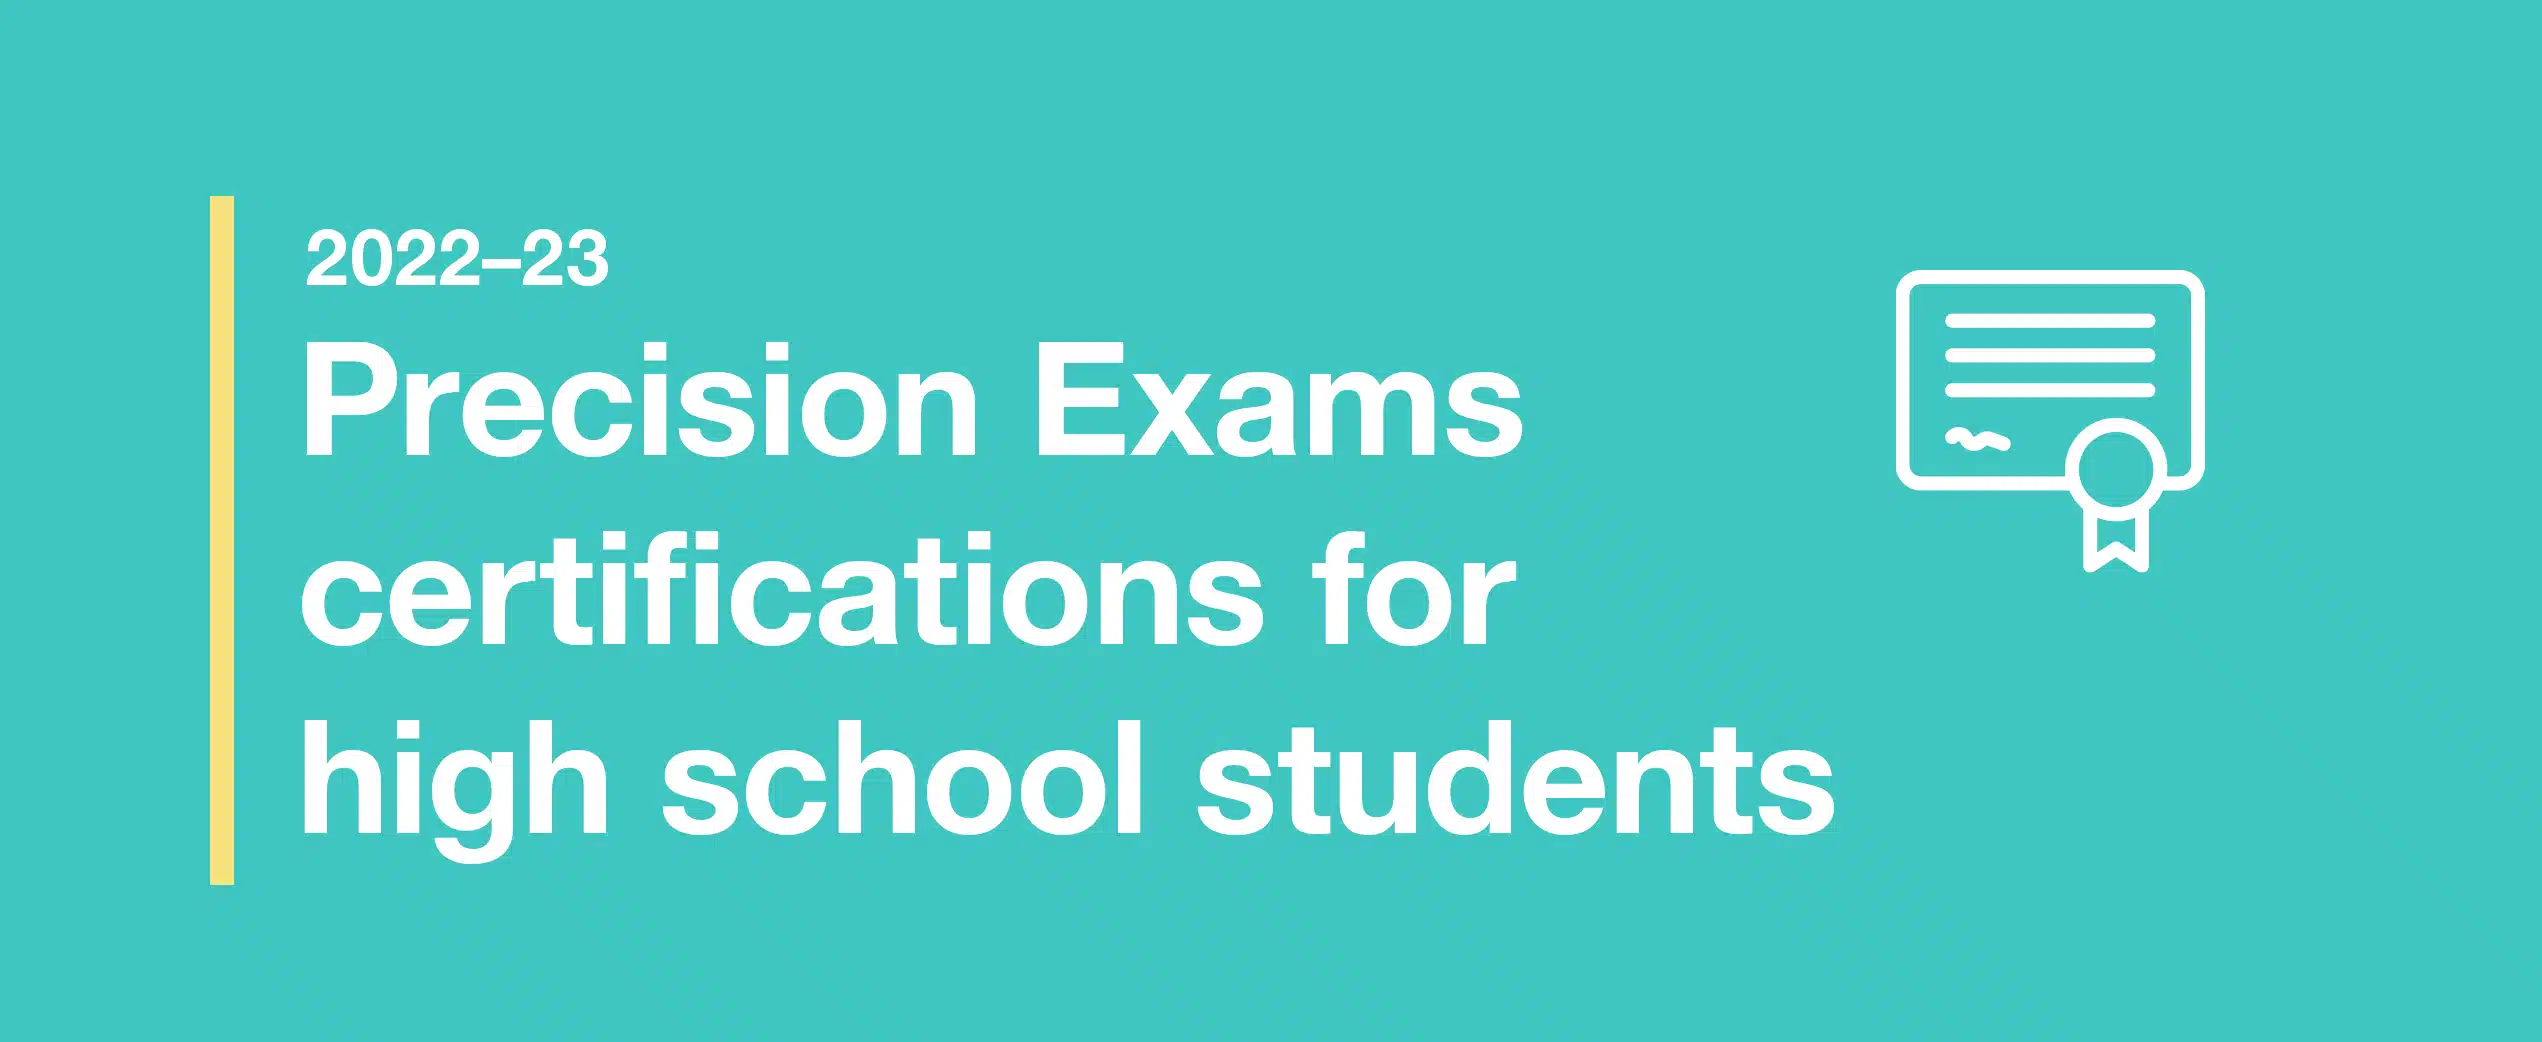 2022–23 Precision Exams certifications for high school students